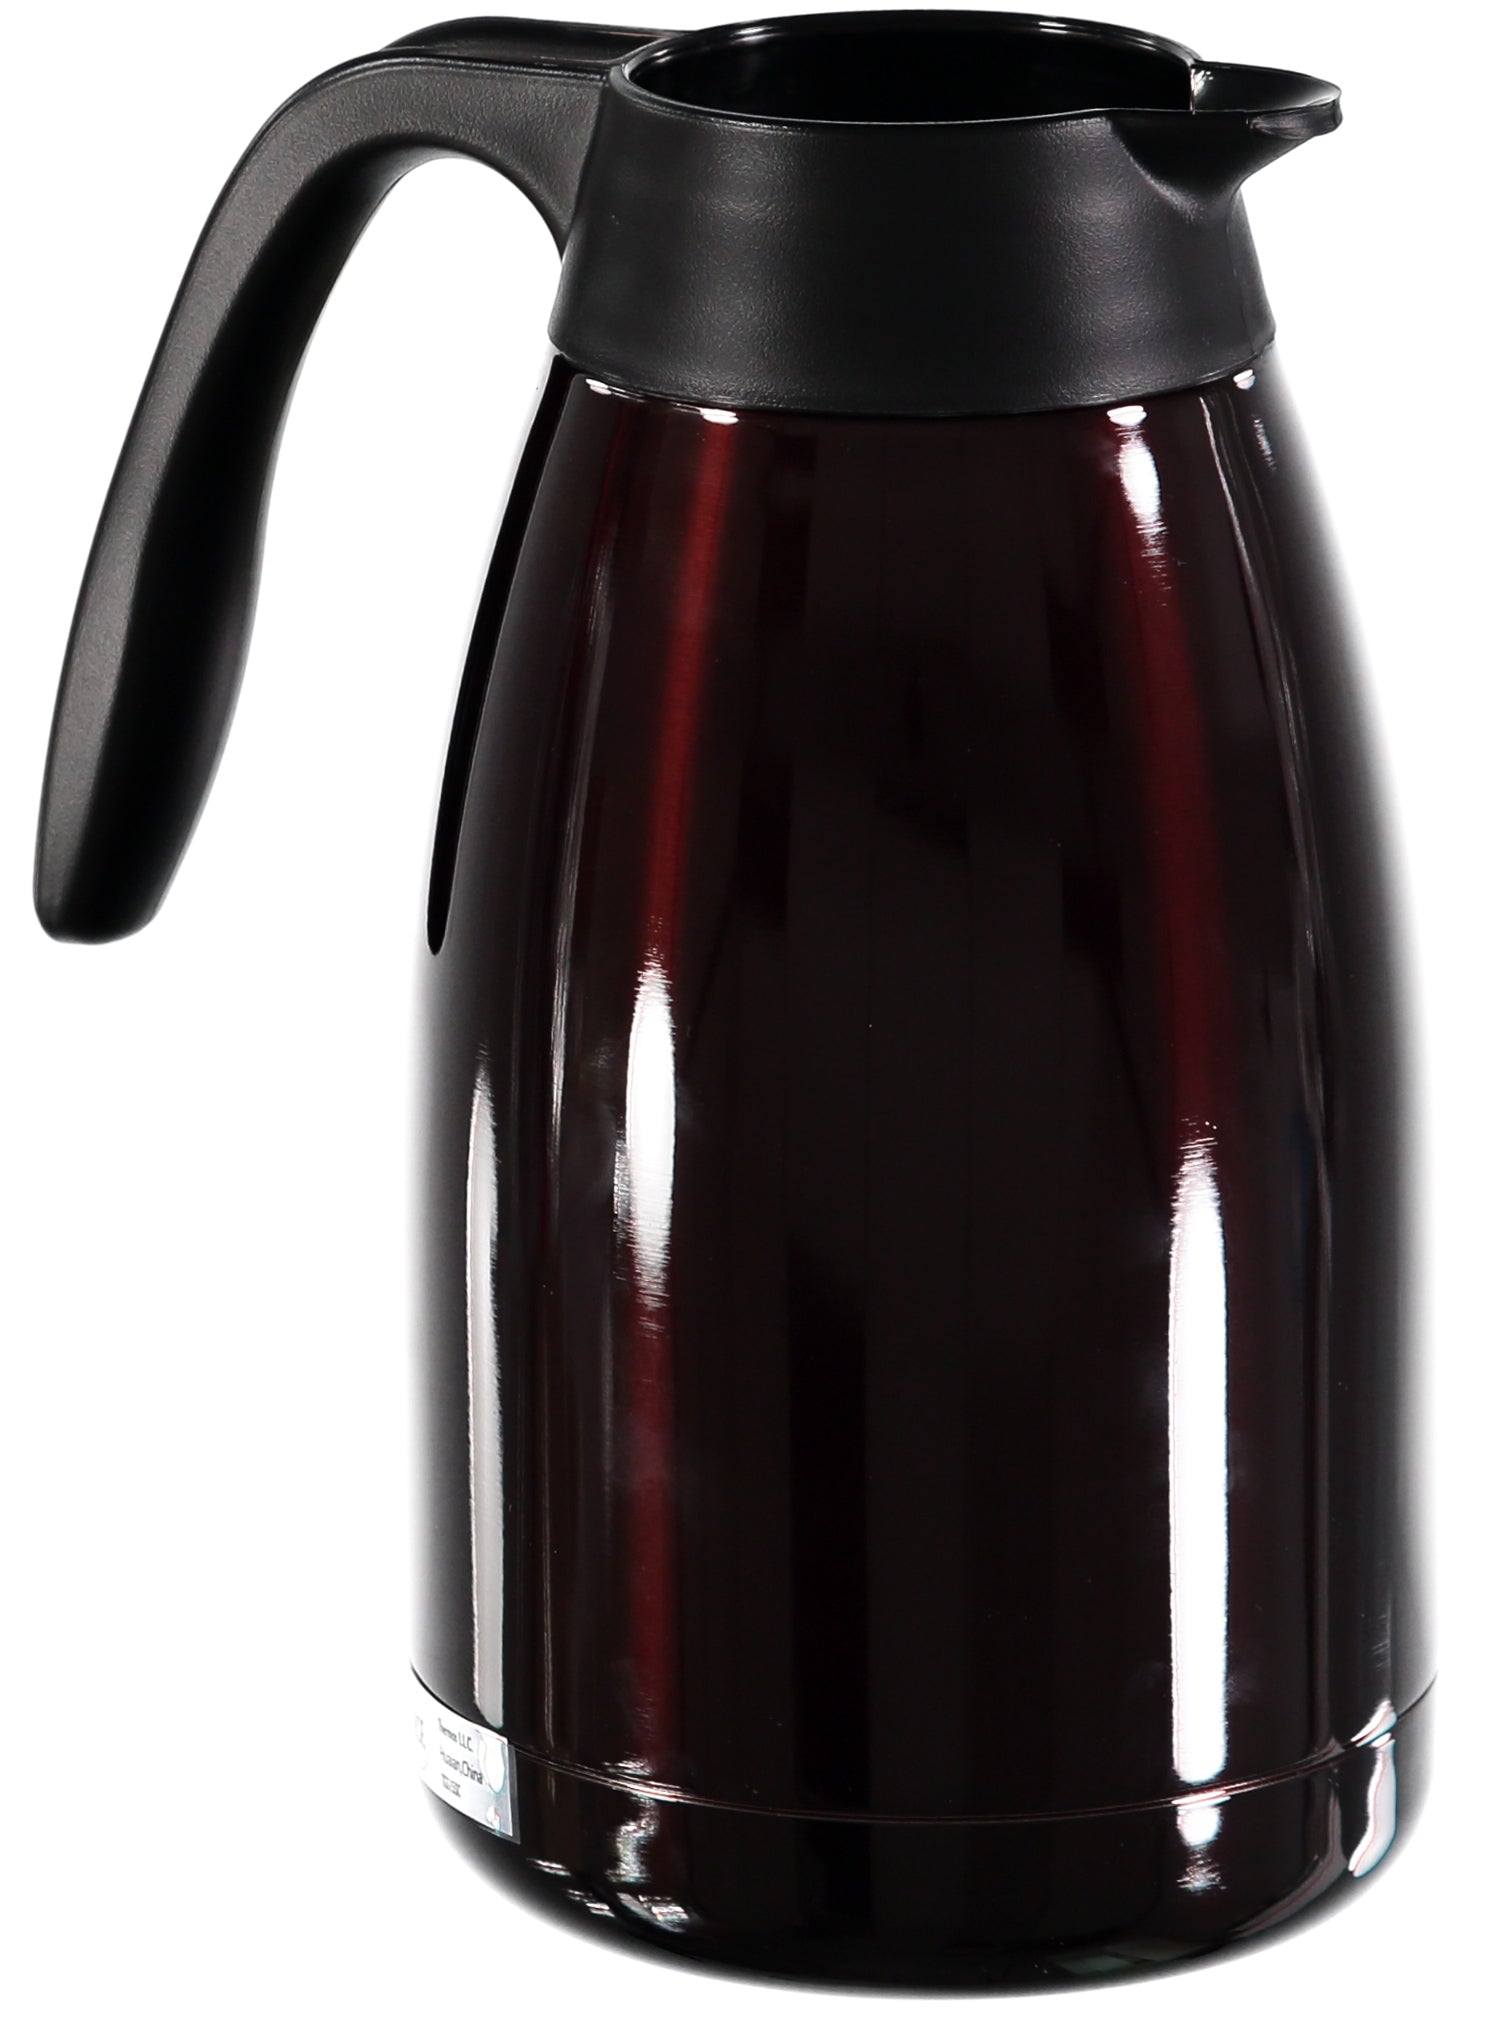 Thermos Tgs15sc 51 oz. Stainless Steel Table Top Carafe